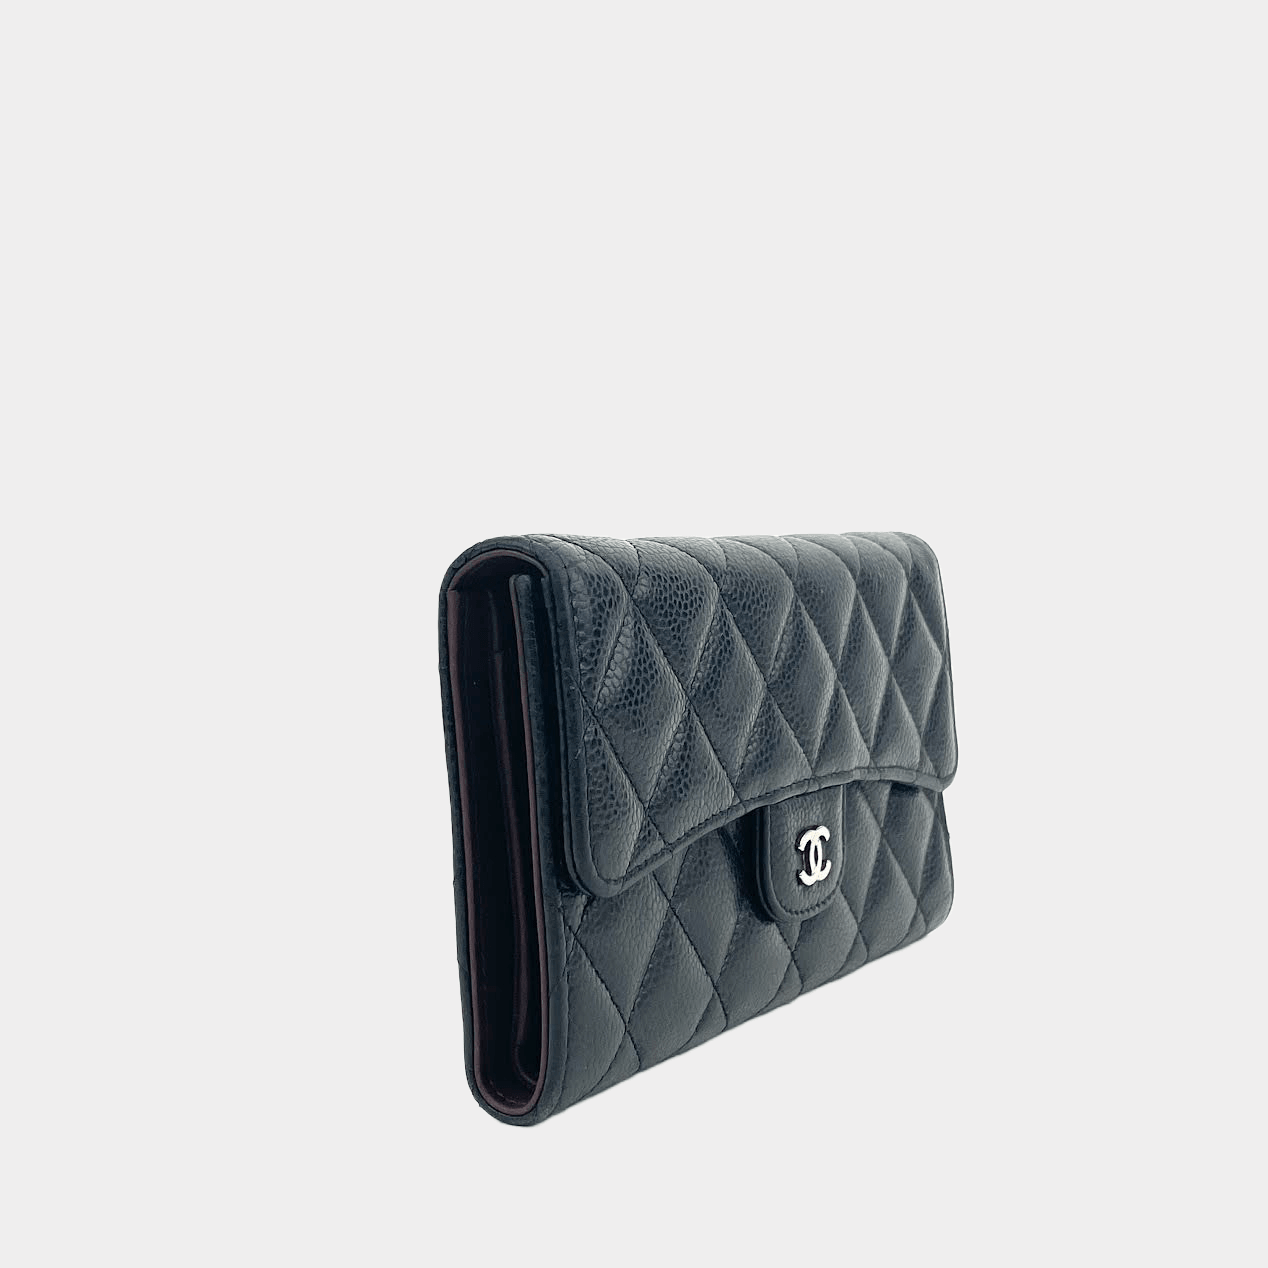 Authentic CHANEL Black Caviar Wallet  Valamode